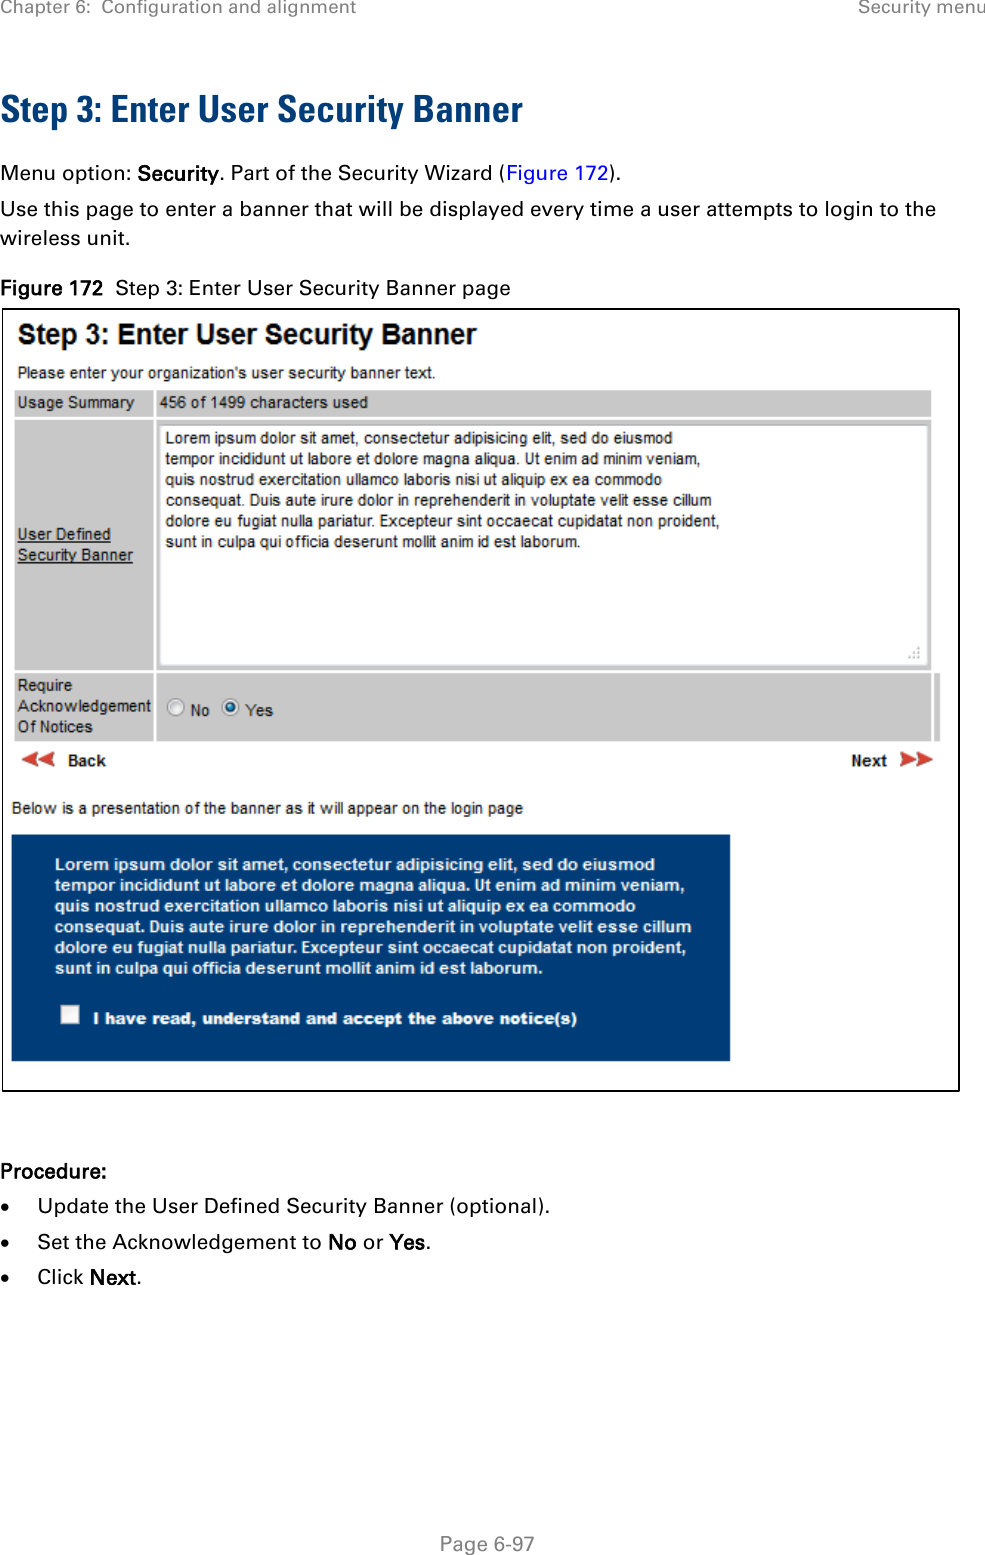 Chapter 6:  Configuration and alignment Security menu  Step 3: Enter User Security Banner Menu option: Security. Part of the Security Wizard (Figure 172). Use this page to enter a banner that will be displayed every time a user attempts to login to the wireless unit.  Figure 172  Step 3: Enter User Security Banner page   Procedure: • Update the User Defined Security Banner (optional). • Set the Acknowledgement to No or Yes. • Click Next.  Page 6-97 